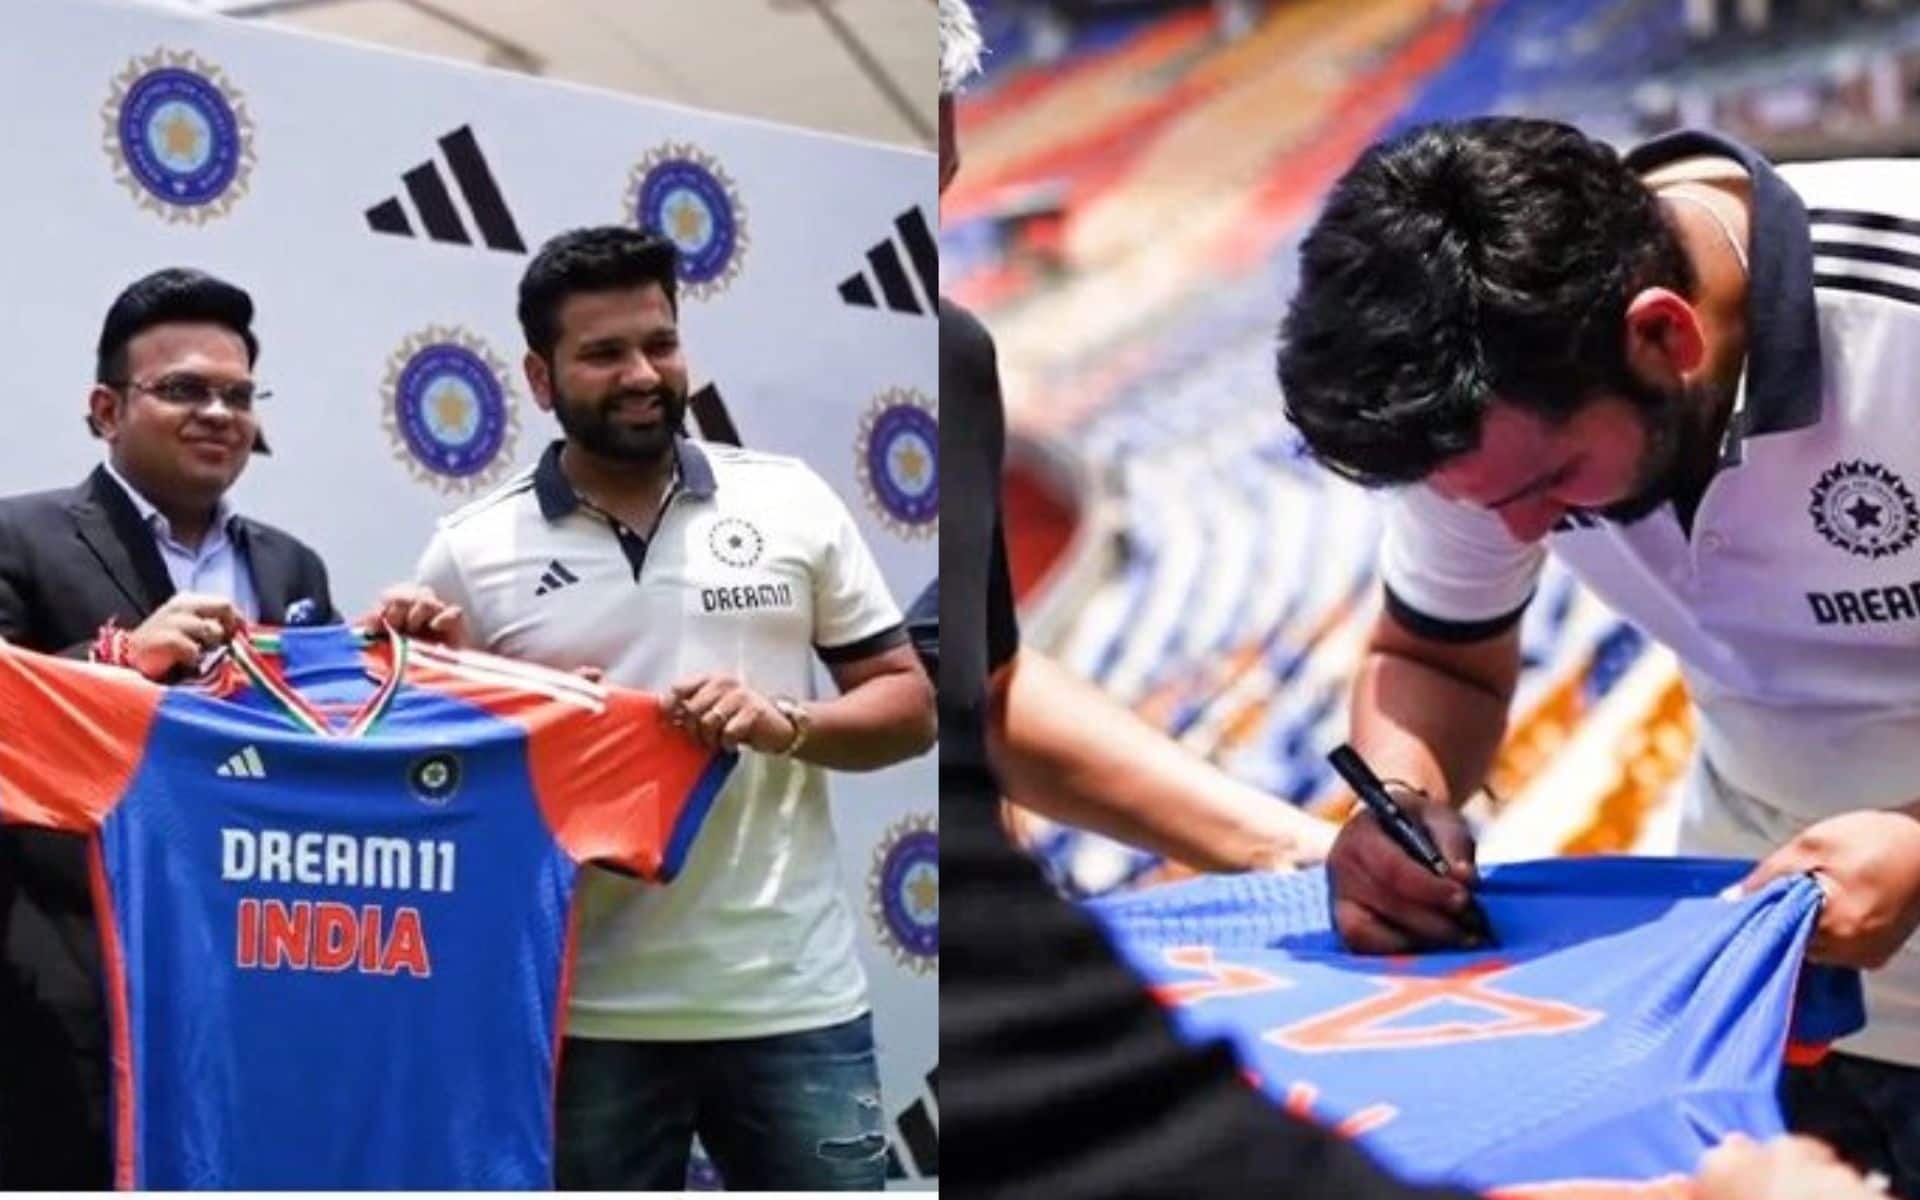 Rohit Sharma With Jay Shah presented India's jersey for the upcoming T20 World Cup [X.com]